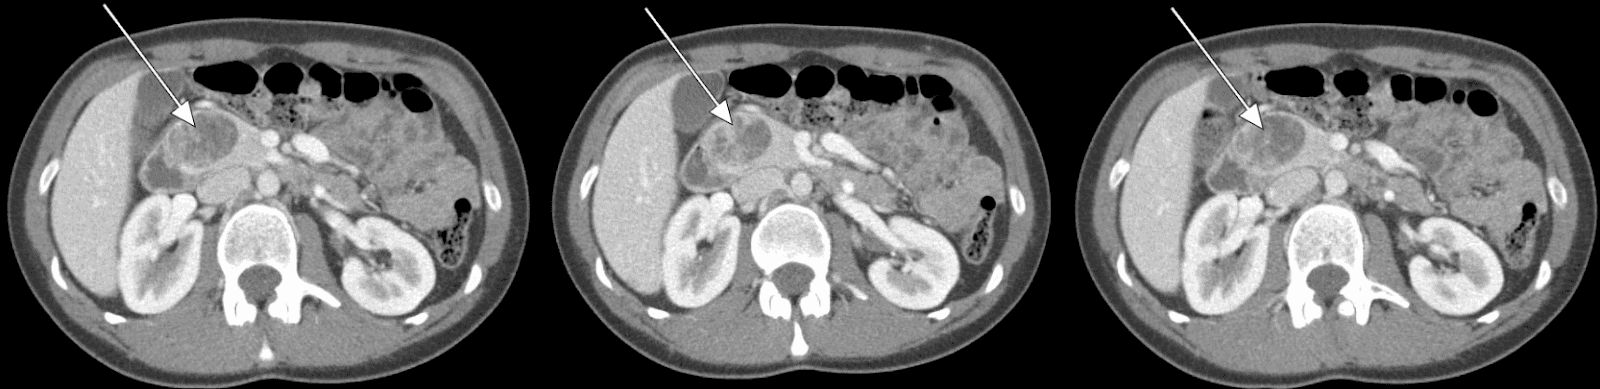 Abdominal CT revealing a 3.5-cm enhancing lesion associated with the head of the pancreas.